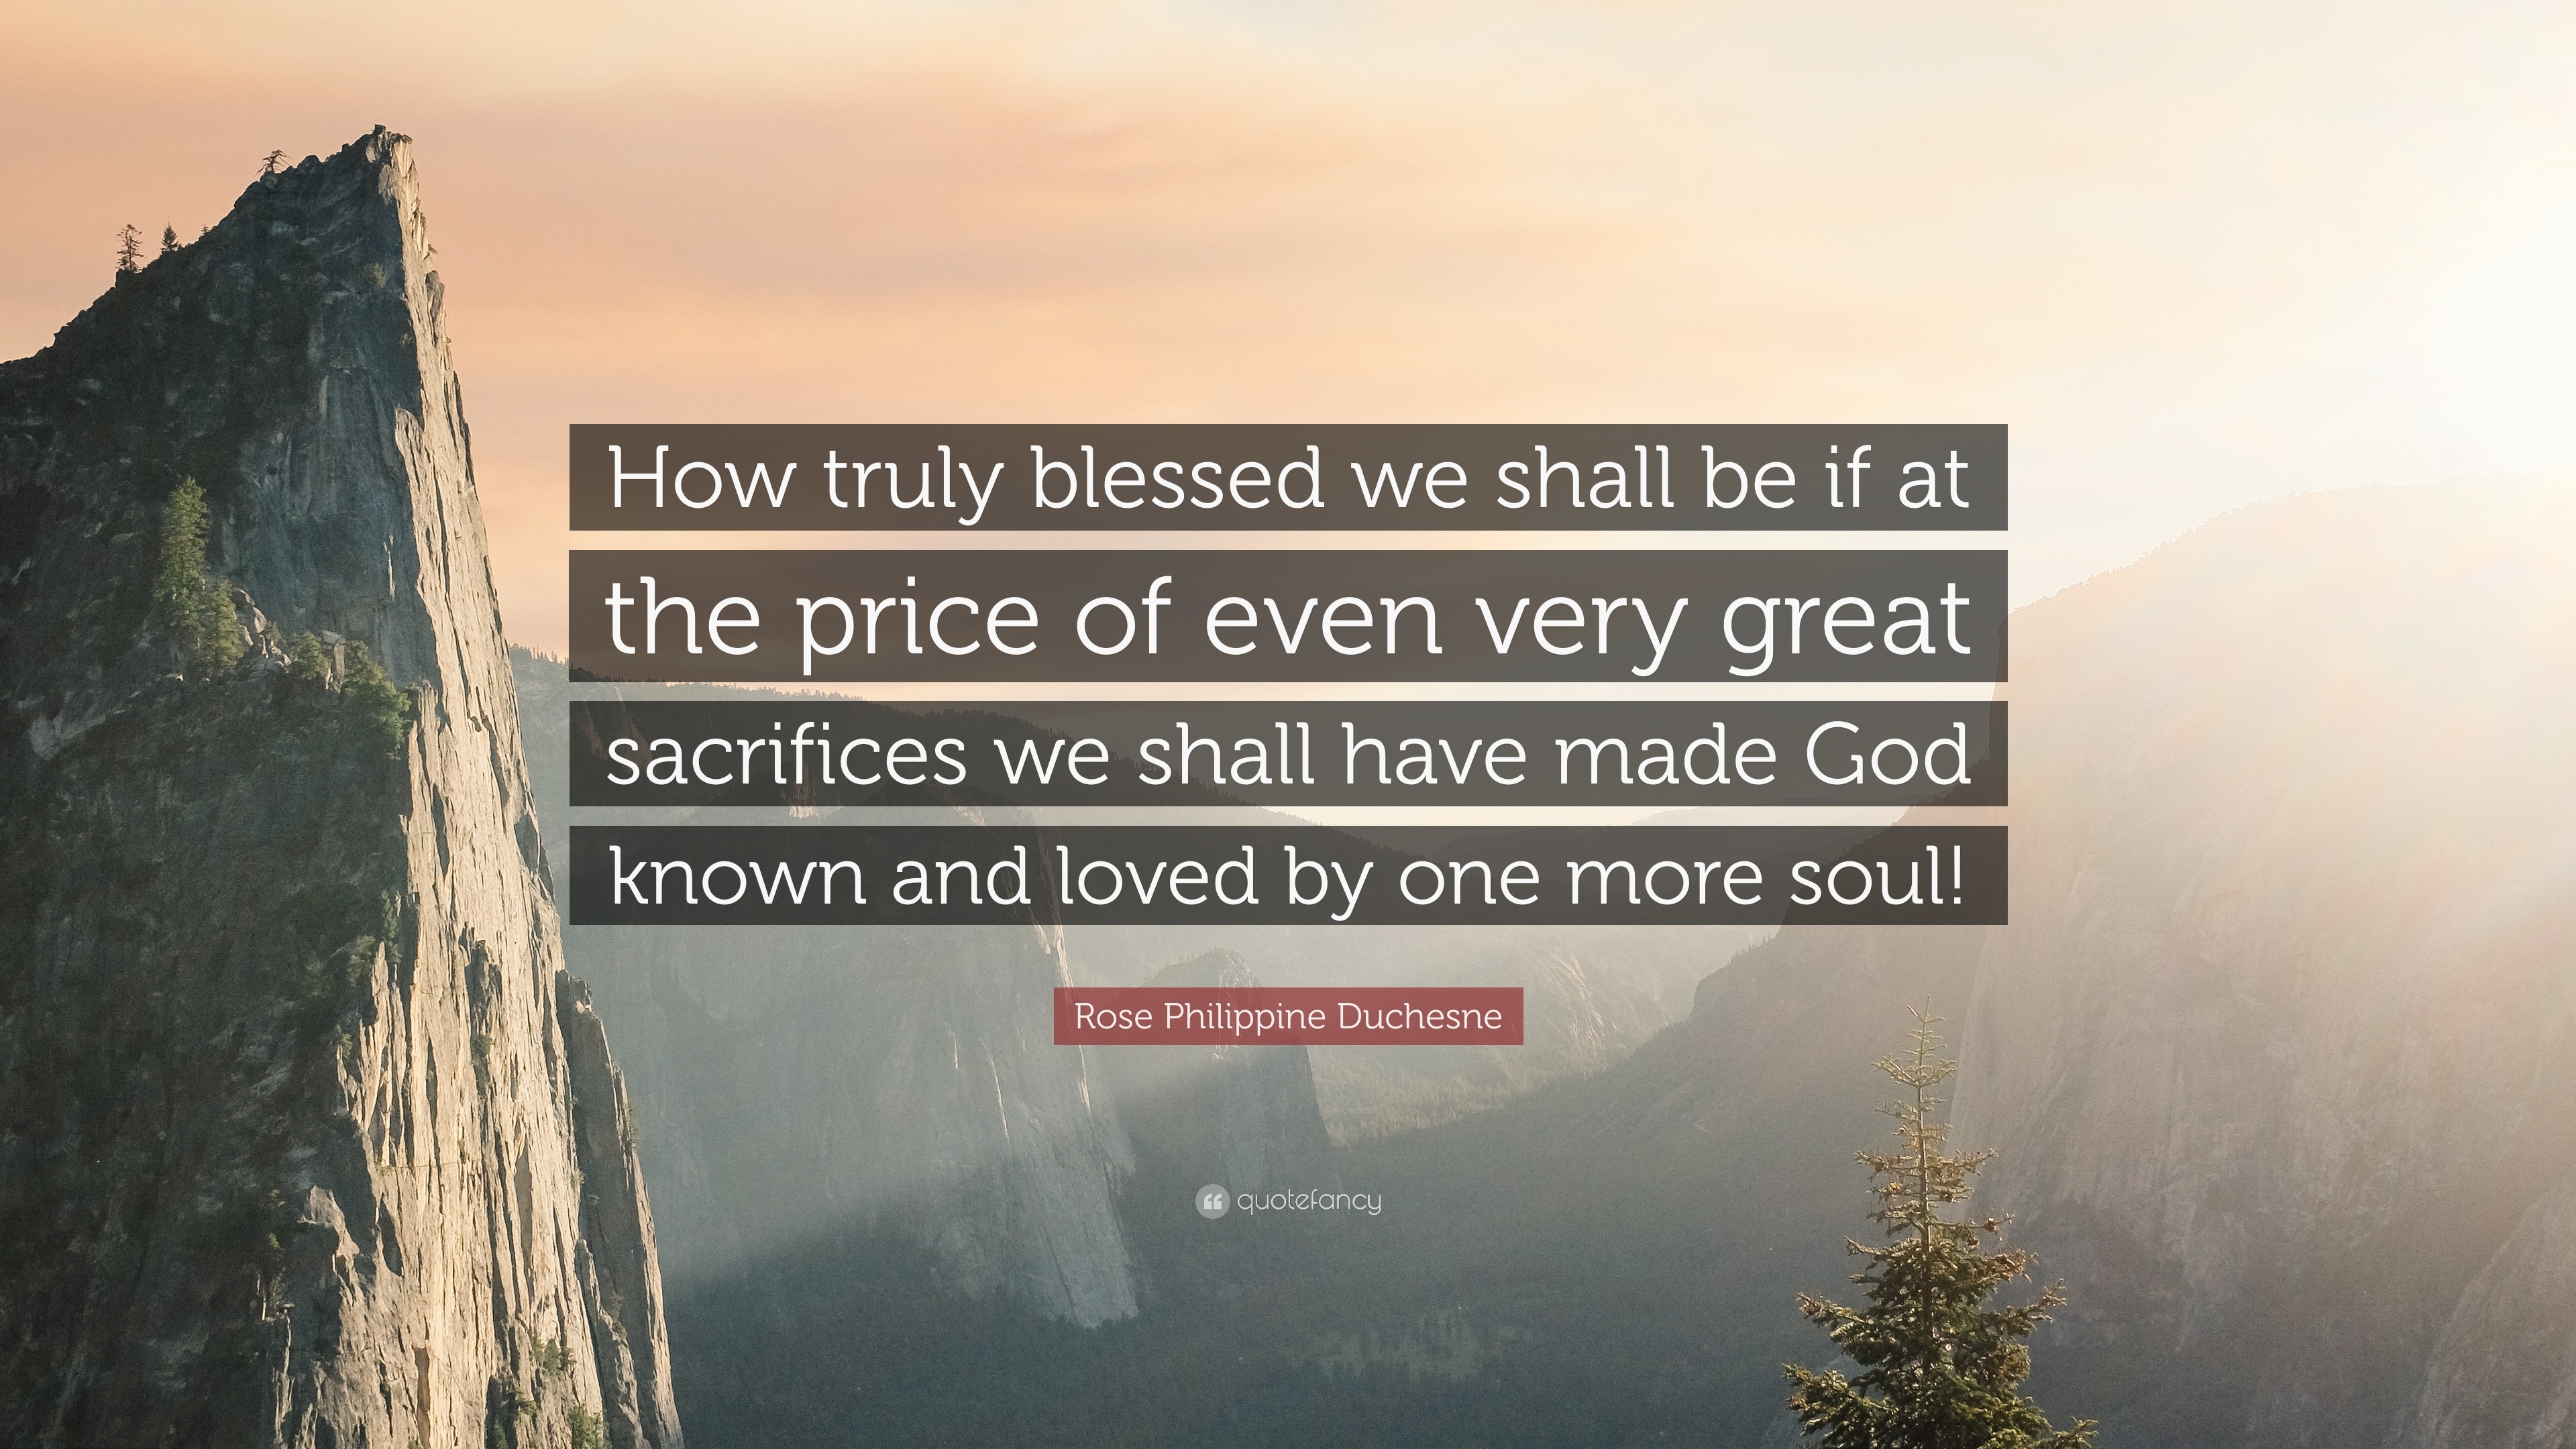 Rose Philippine Duchesne Quote: “How Truly Blessed We Shall Be If At The Price Of Even Very Great Sacrifices We Shall Have Made God Known And Loved By On...”